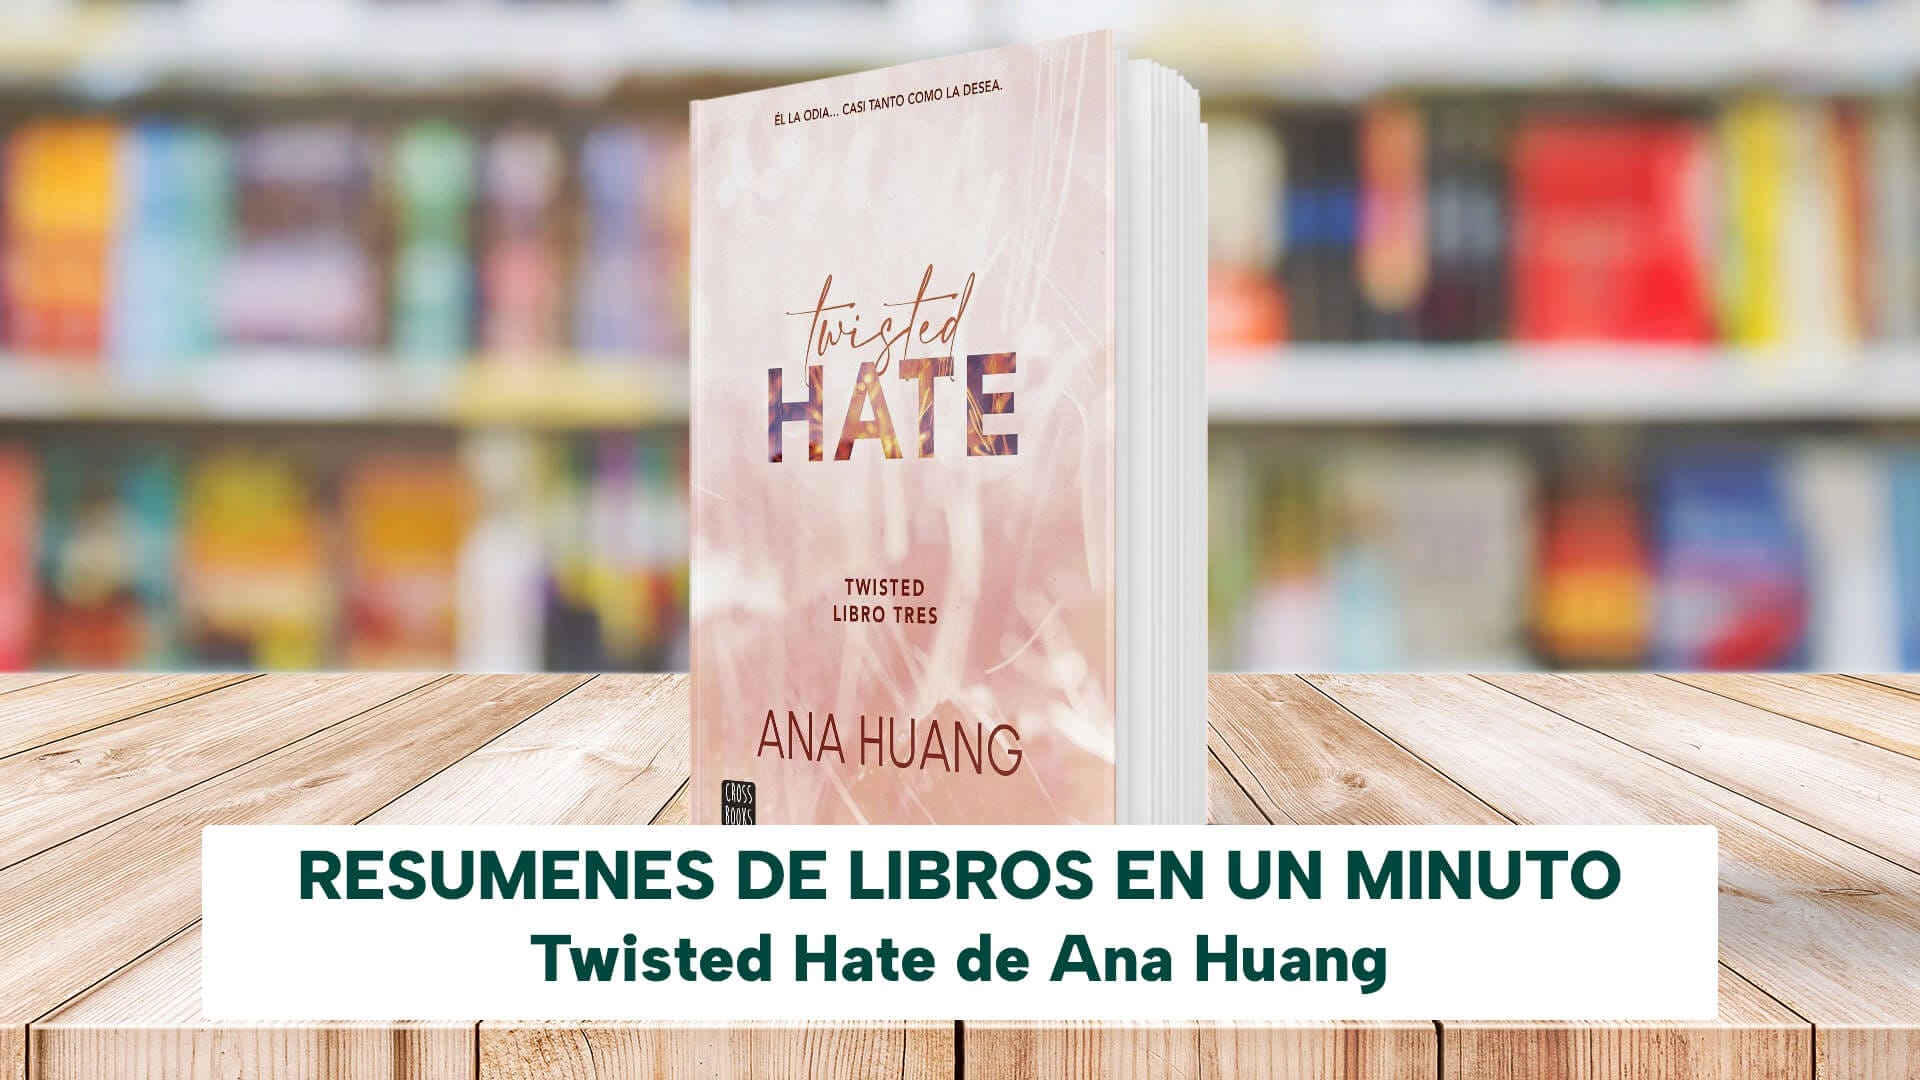 ANA HUANG 4 Libros Juego: Twisted Love + Games + Odio Se Extiende